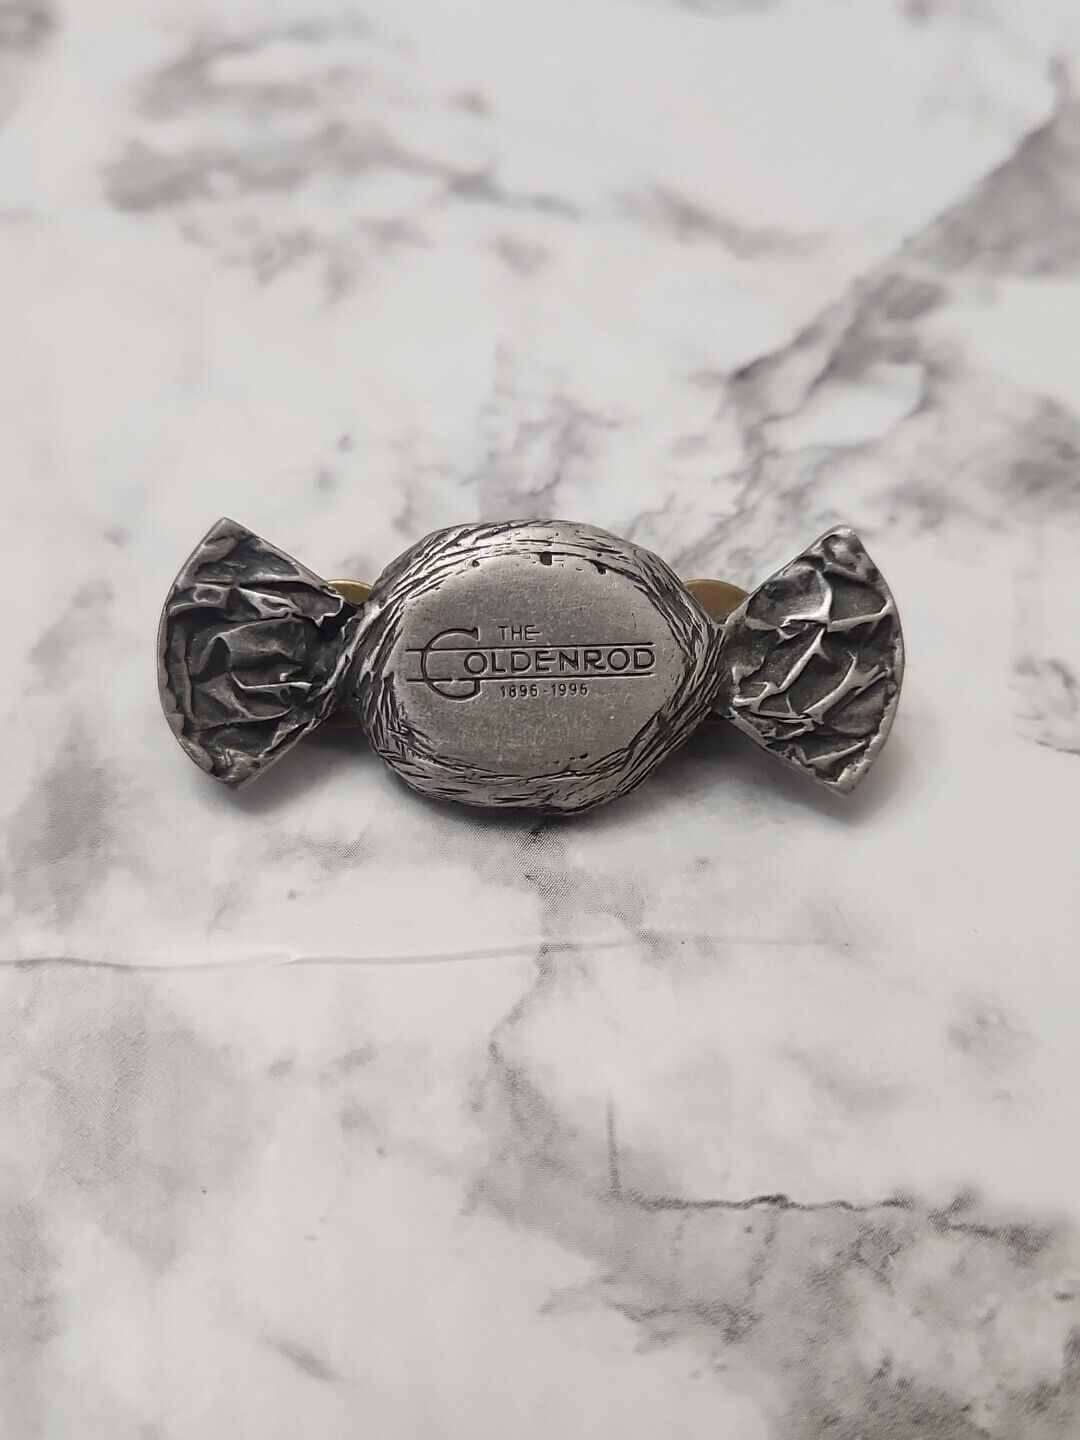 Vintage The Goldenrod 1896 1996 Pewter Candy Shaped Lapel Pin Hat Pin Tie Tack